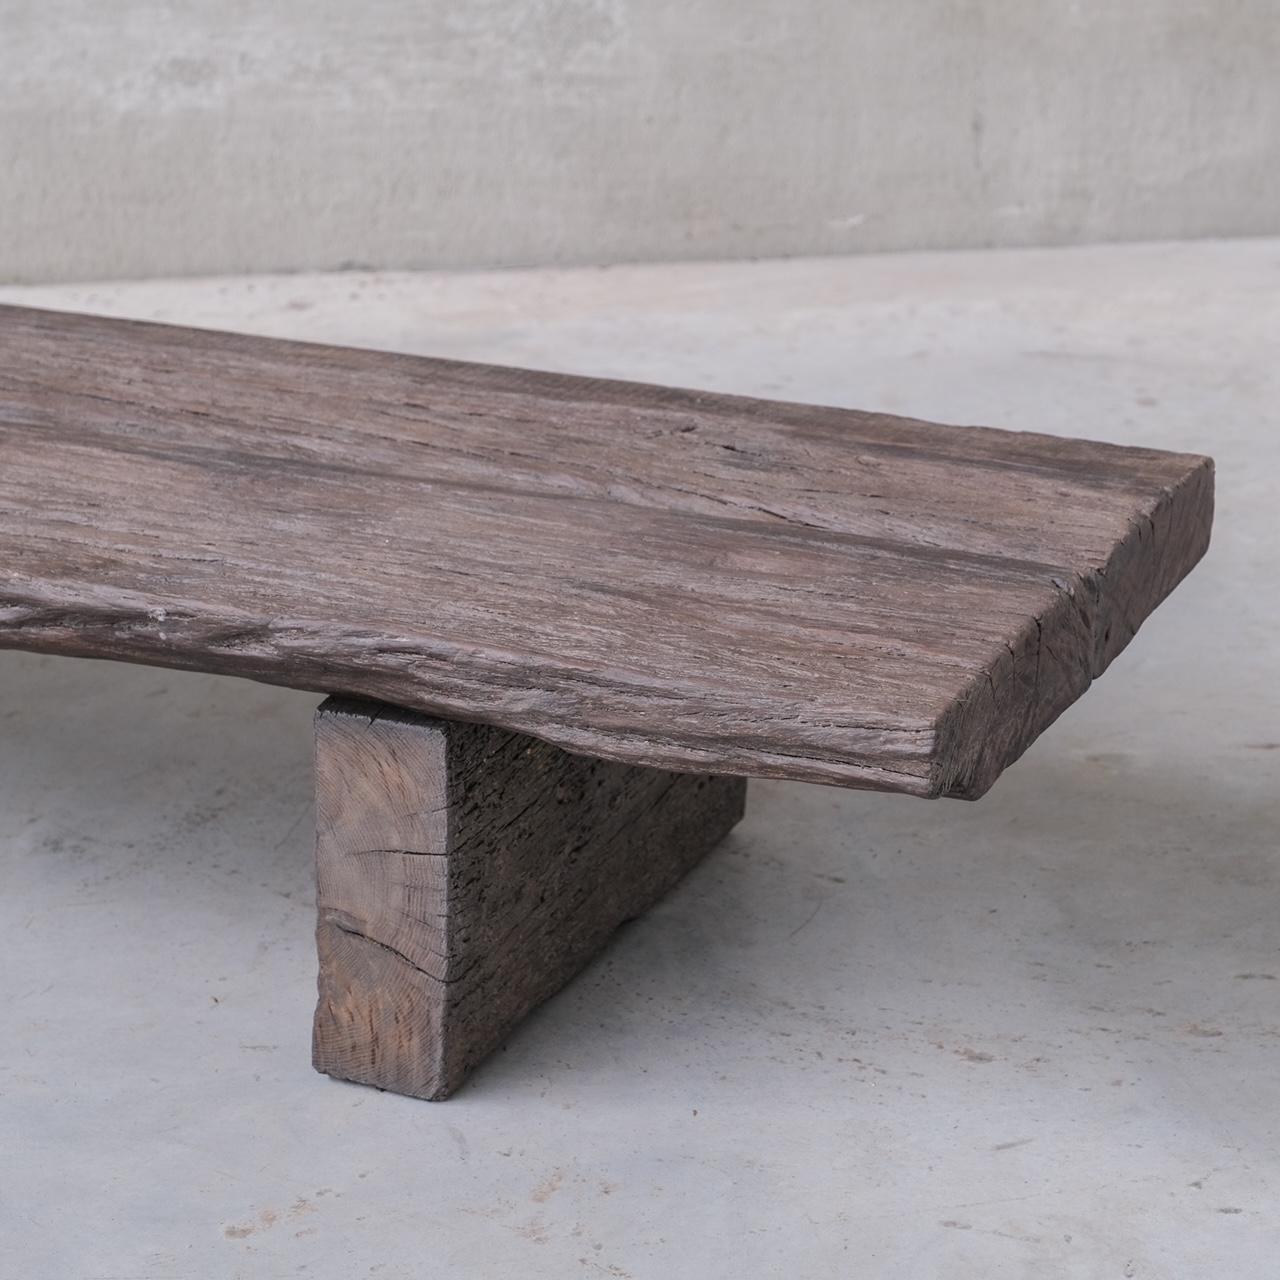 Antique Wooden Low Wabi-Sabi Style Plank Coffee Table In Good Condition For Sale In London, GB